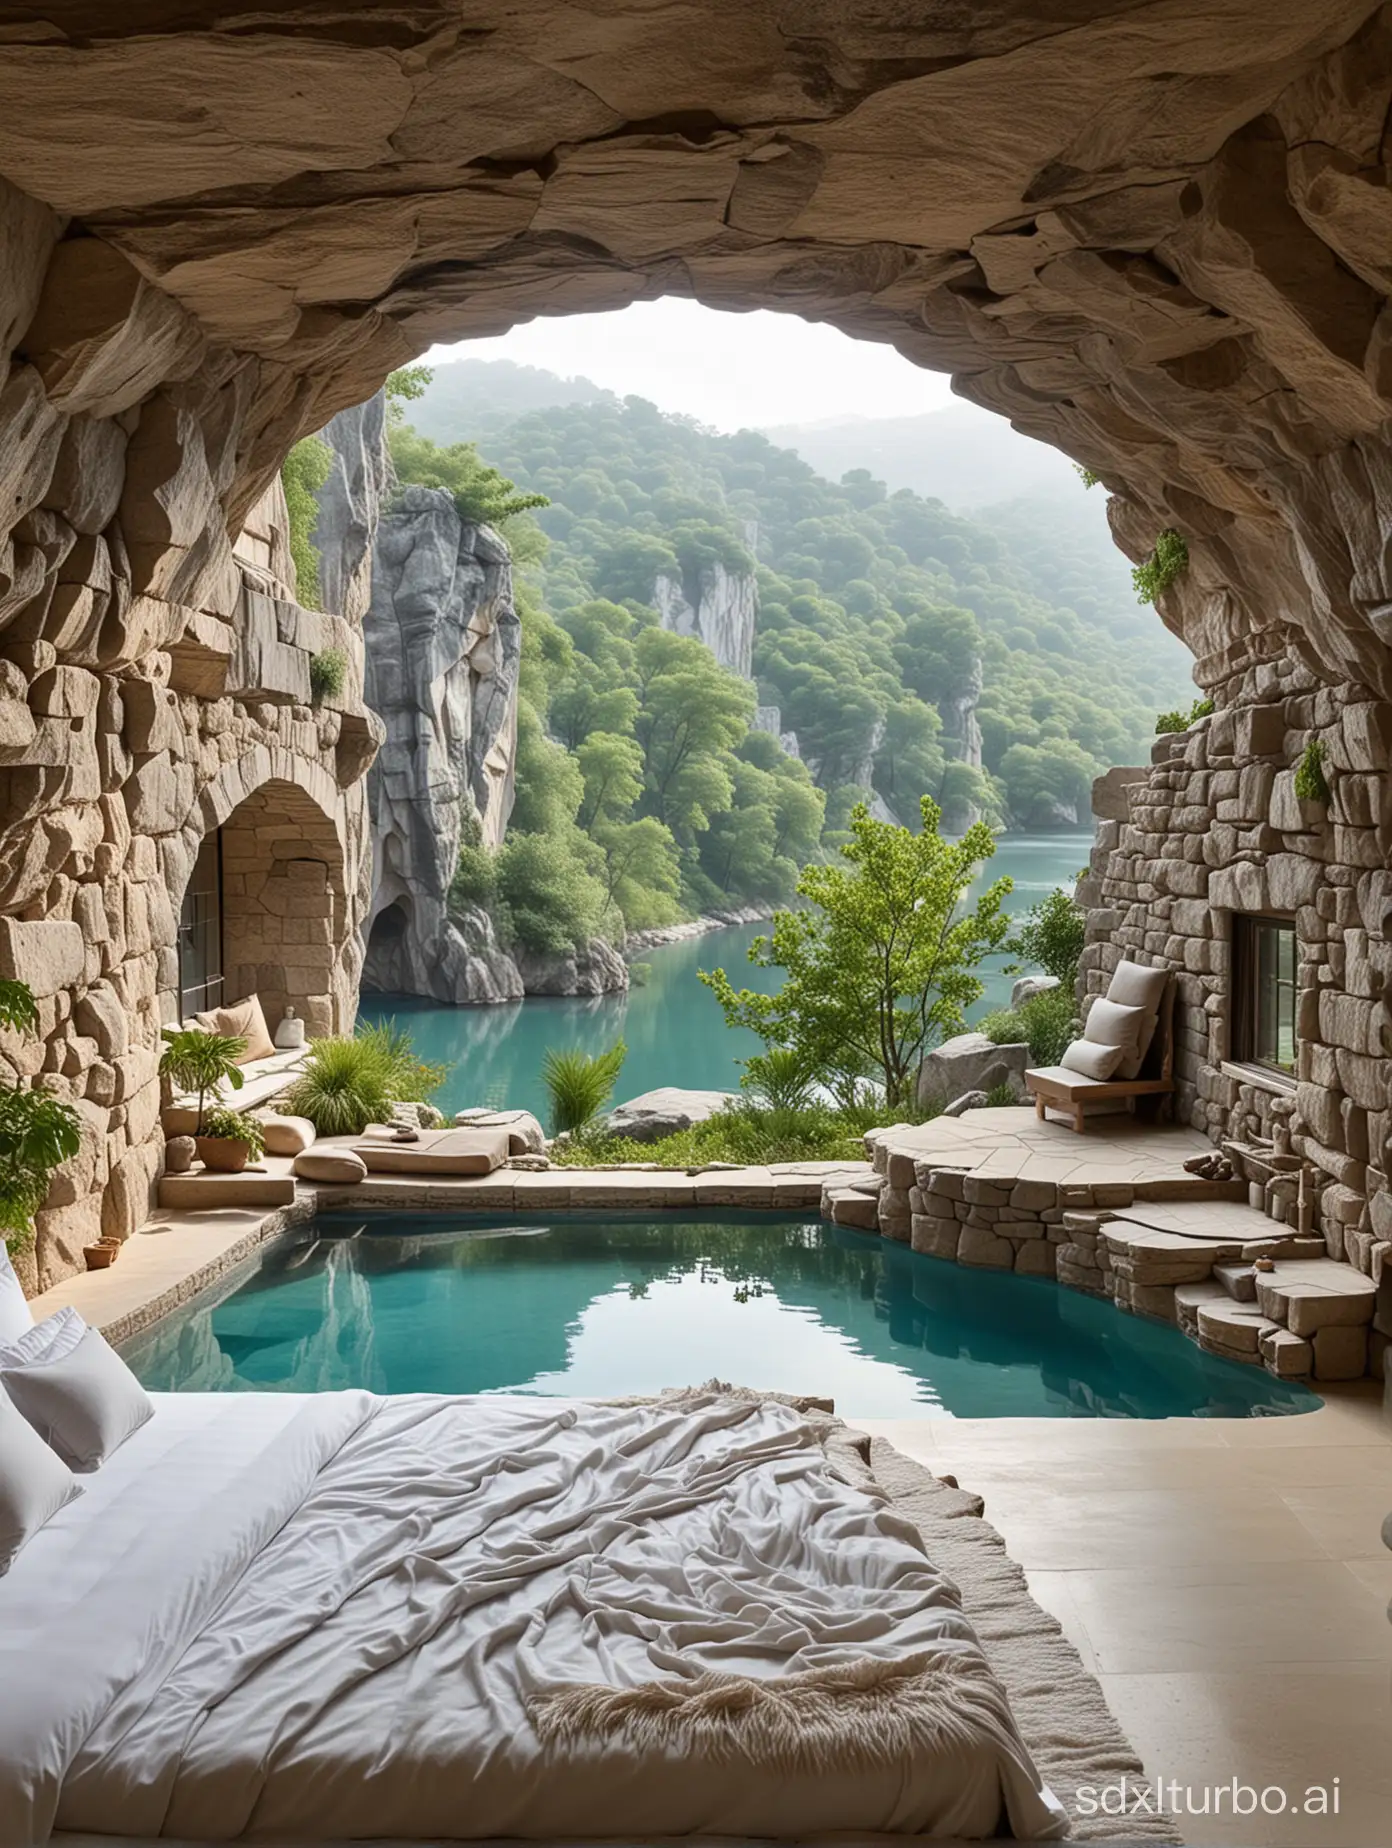 A luxurious bedroom seamlessly integrated into a natural cave setting. The room features rough stone walls that are part of the cave itself, creating an organic and rugged appearance. There is a large, clear window that reveals a misty lake surrounded by lush greenery, giving the impression of a hidden oasis. The focal point is an indoor pool with calm turquoise water, reflecting the tranquility of the setting. The pool is surrounded by natural stone, blending with the cave's interior. Beside the pool, there is a comfortable bed with plush bedding, positioned to provide a view of the lake through the window. The room's design maximizes the natural light that filters in, highlighting the peaceful coexistence of modern luxury and the raw beauty of nature. This vertical image emphasizes the height of the cave and the depth of the view outside.